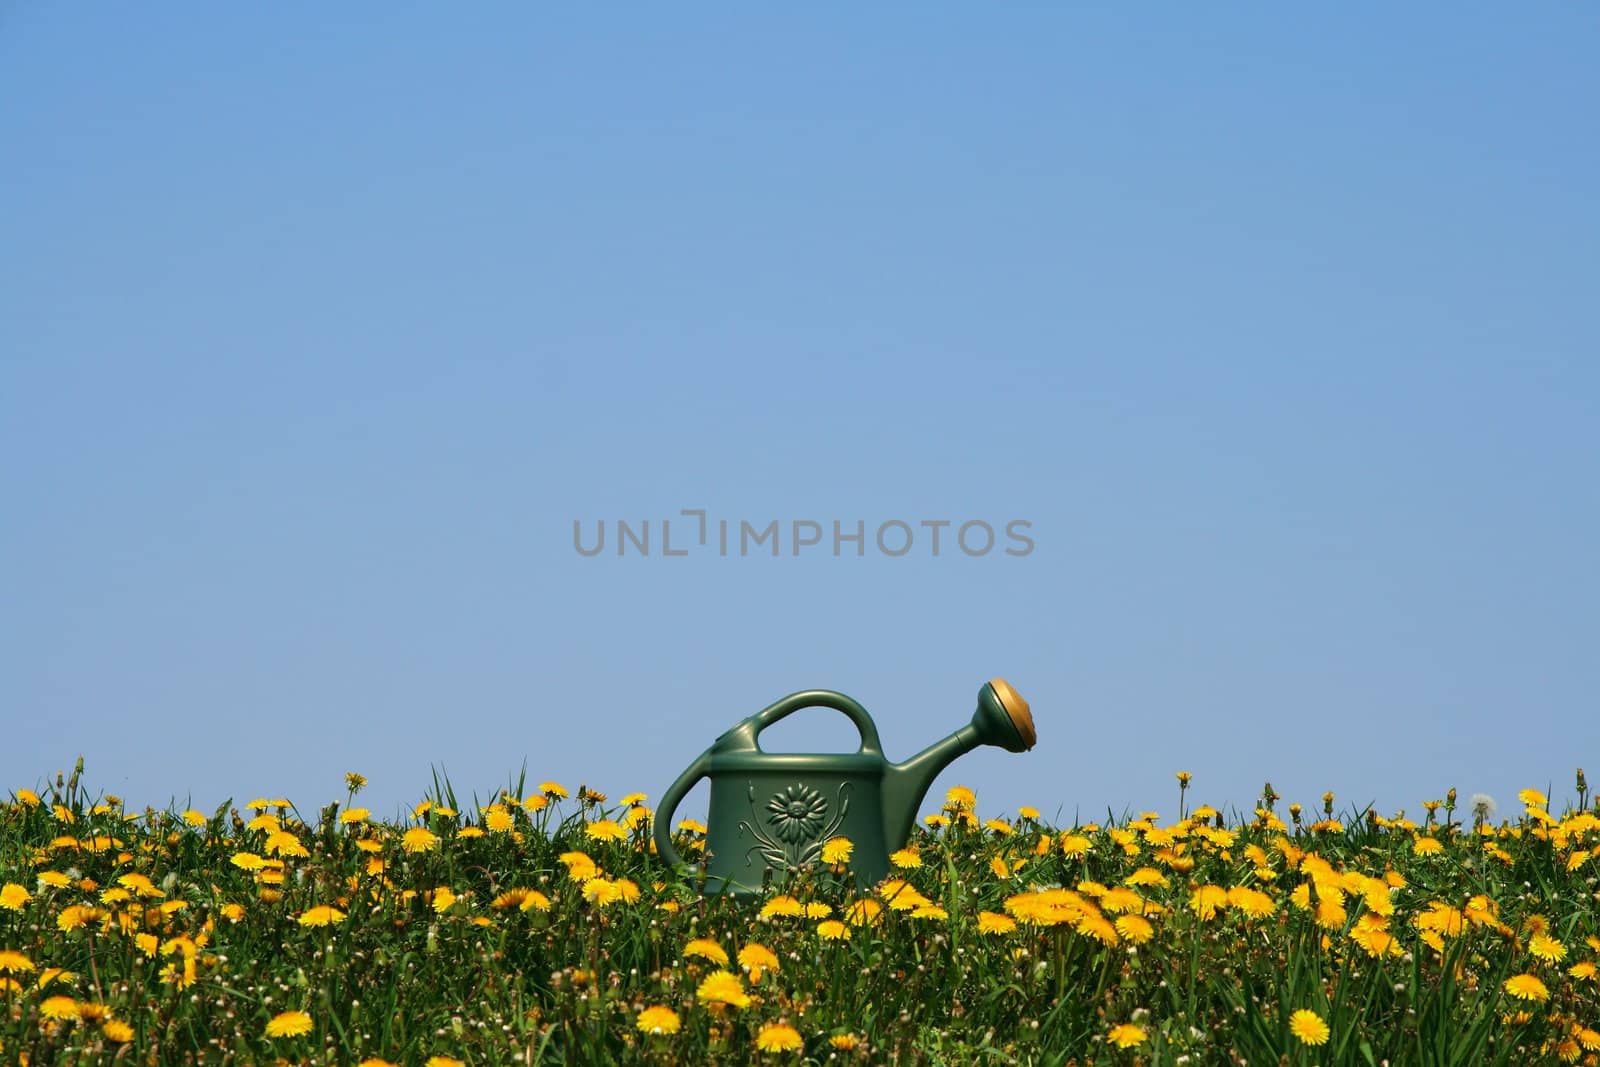 Green watering-can among yellow spring flowers in the field.